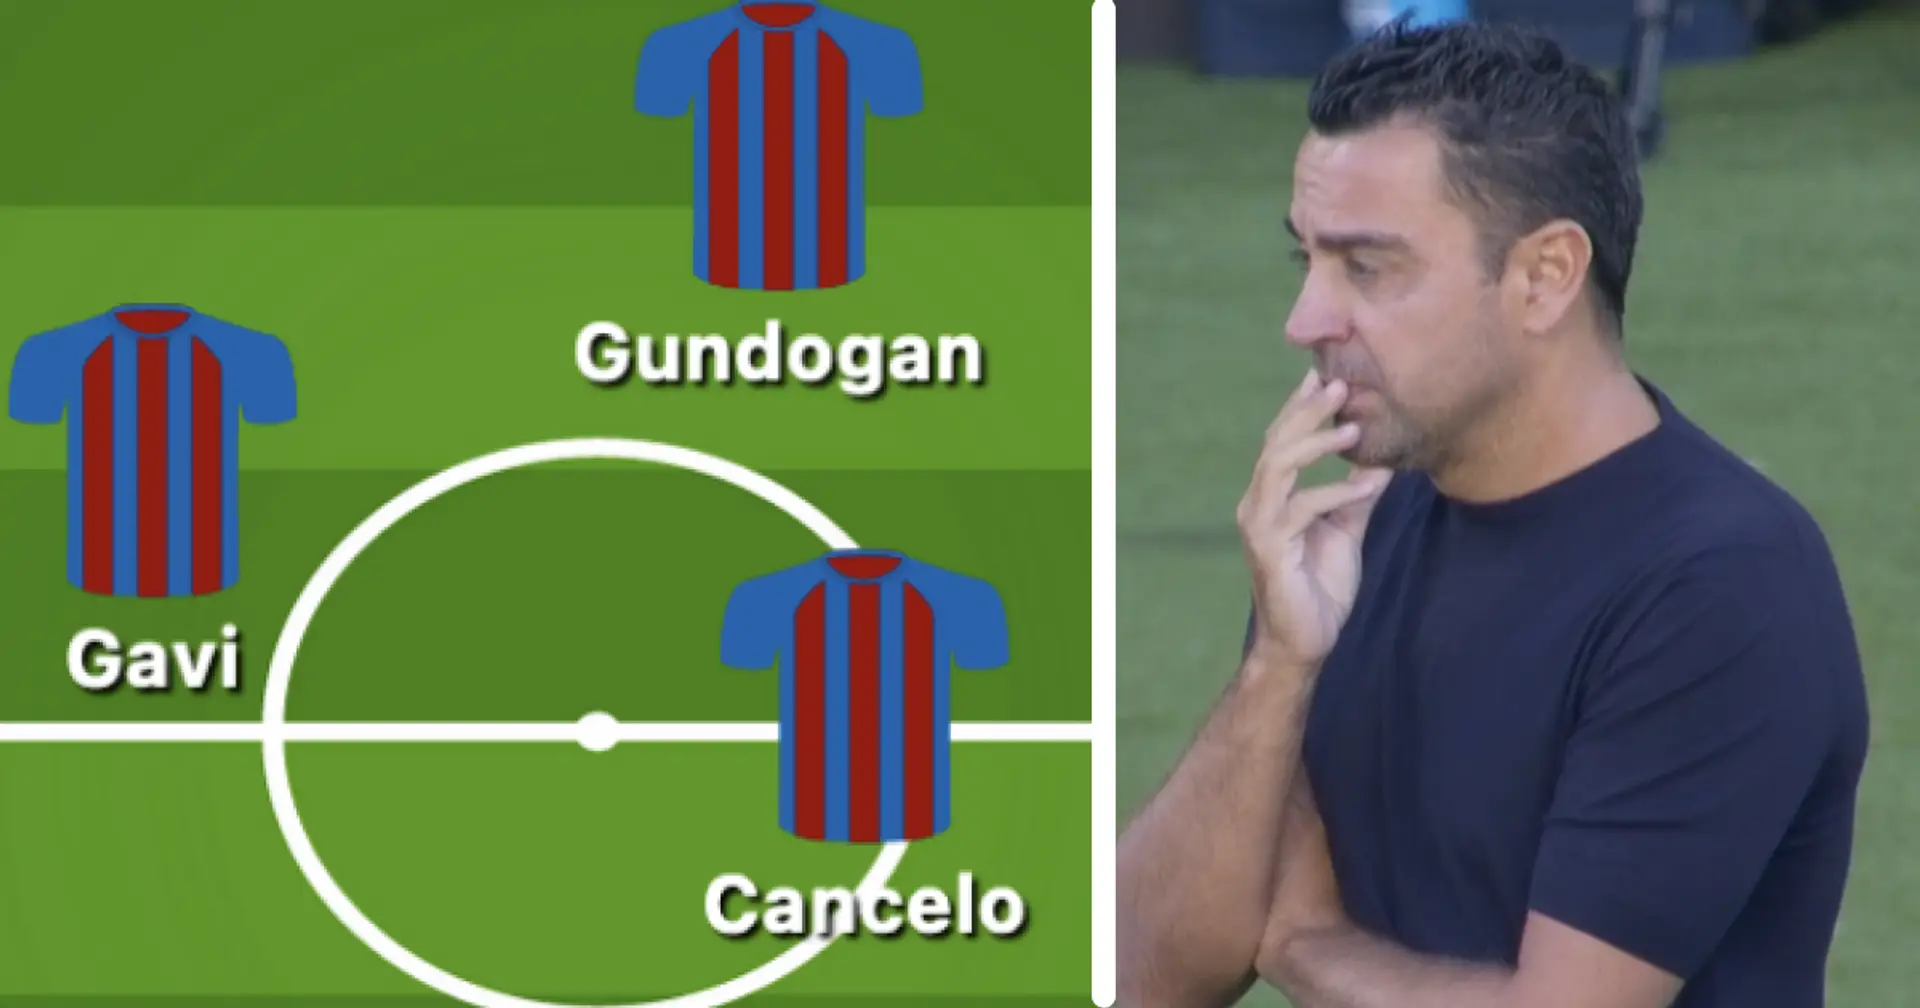 Barca's formation in 2nd half against Celta Vigo shown in lineup